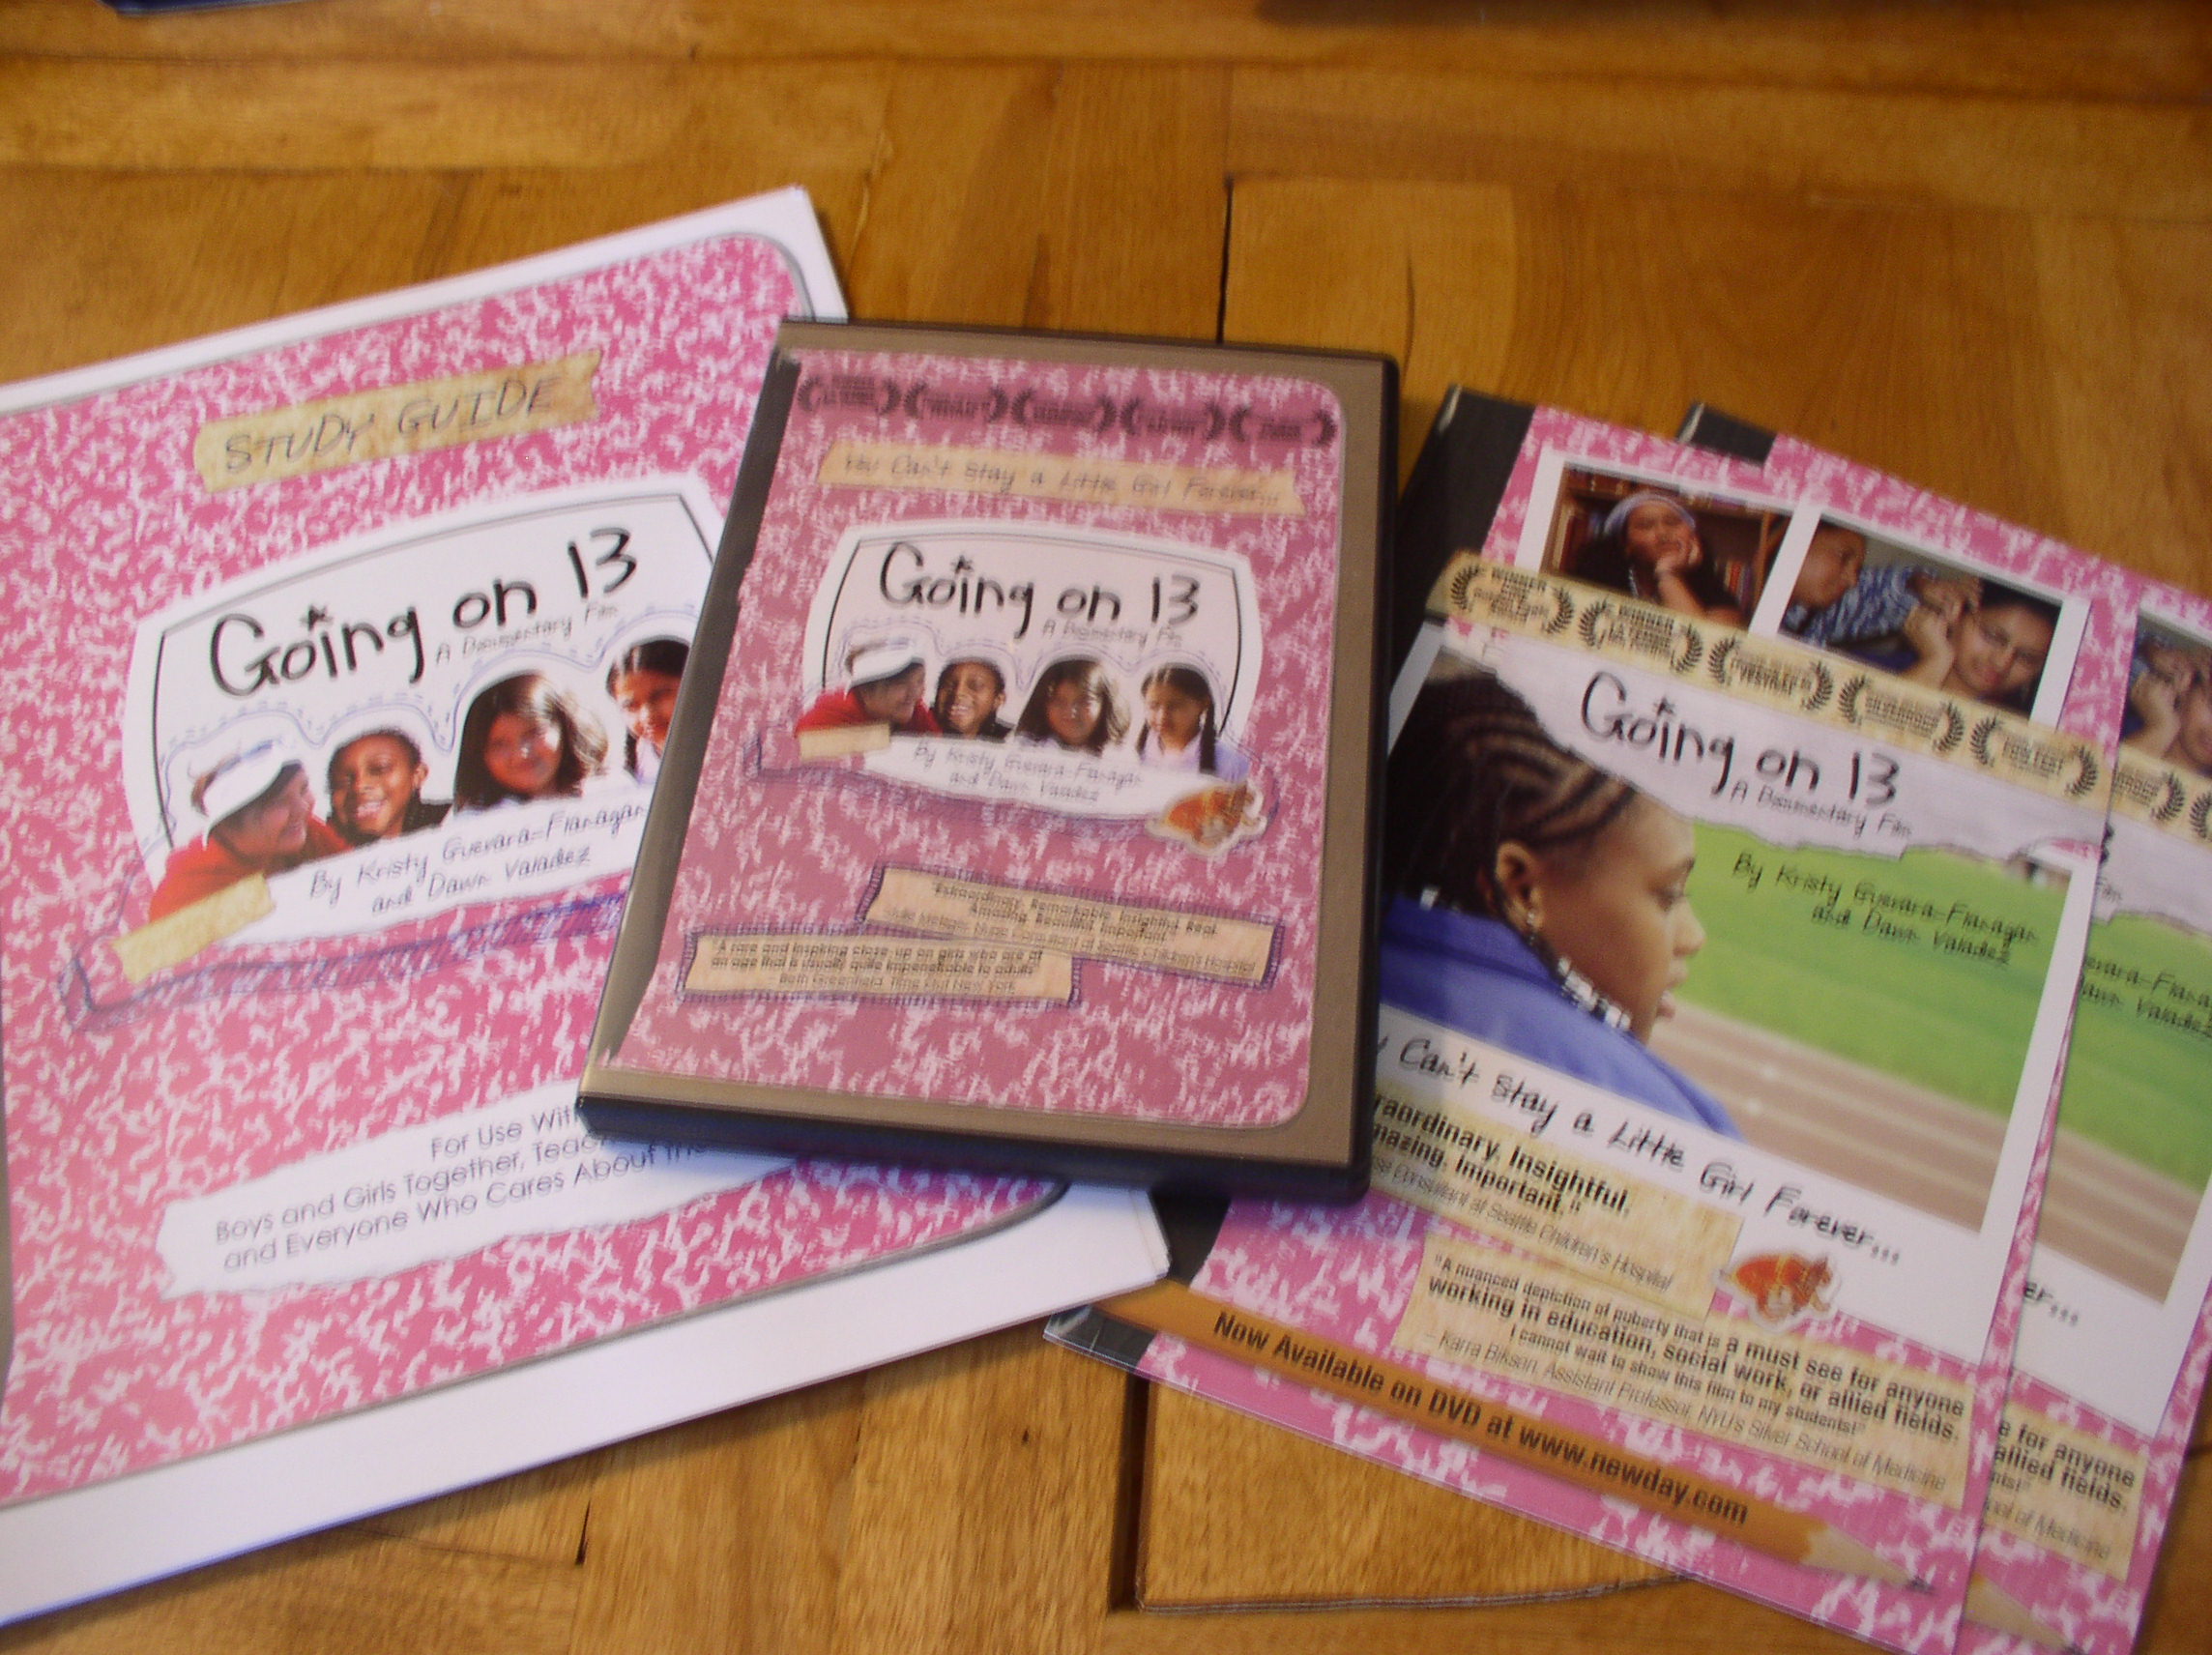 Bound study guide, DVD, and promotional inserts